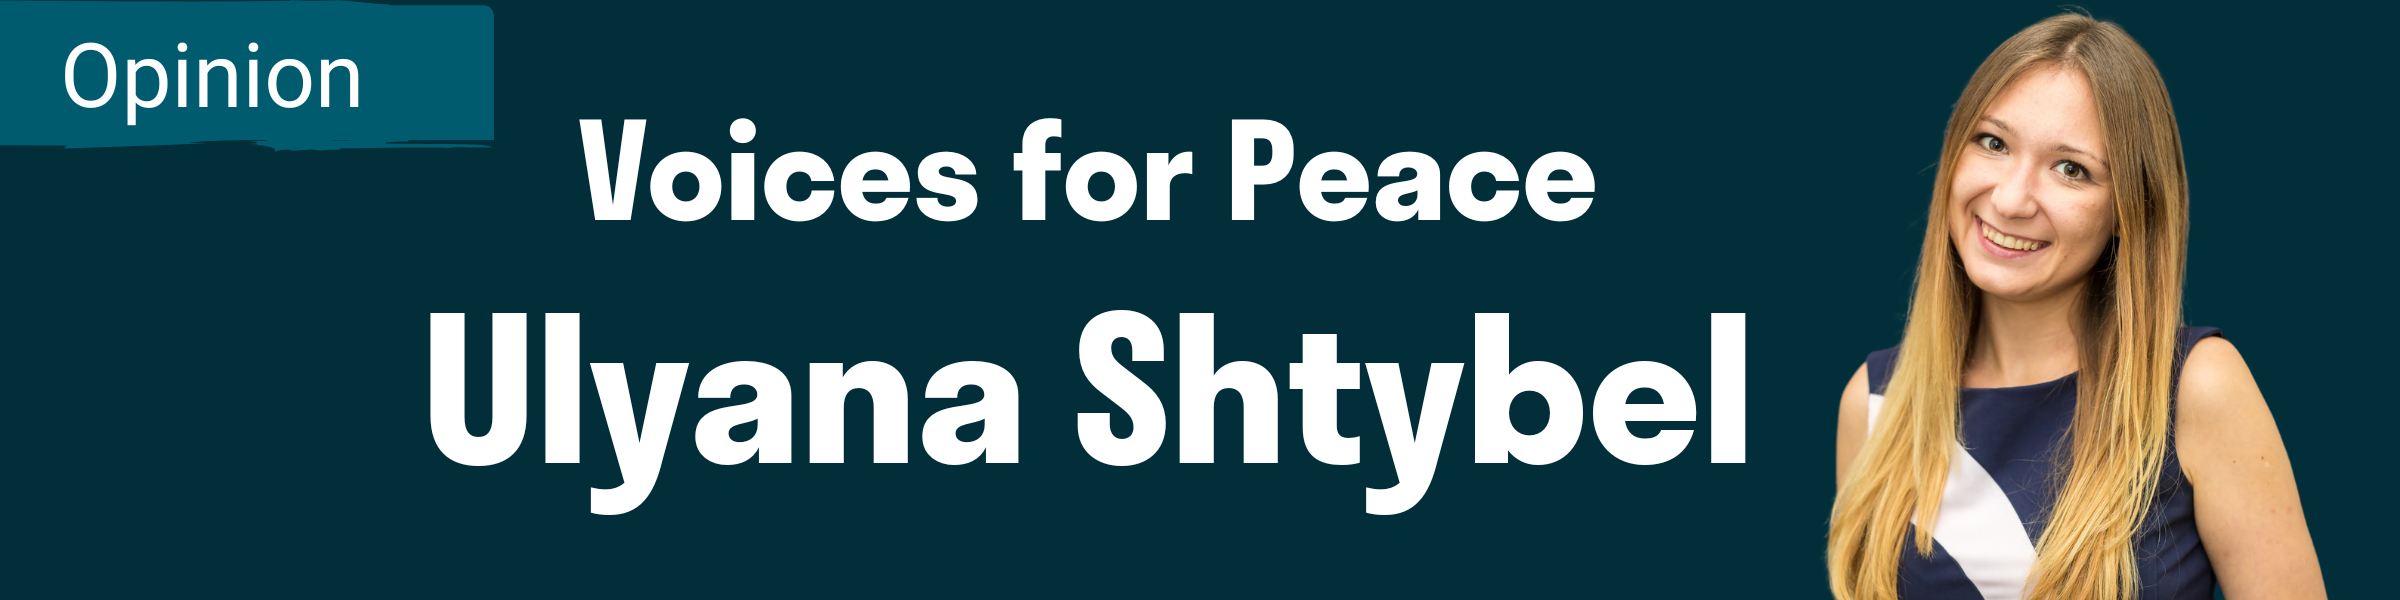 Banner for Ulyana Shtybel Voices for Peace